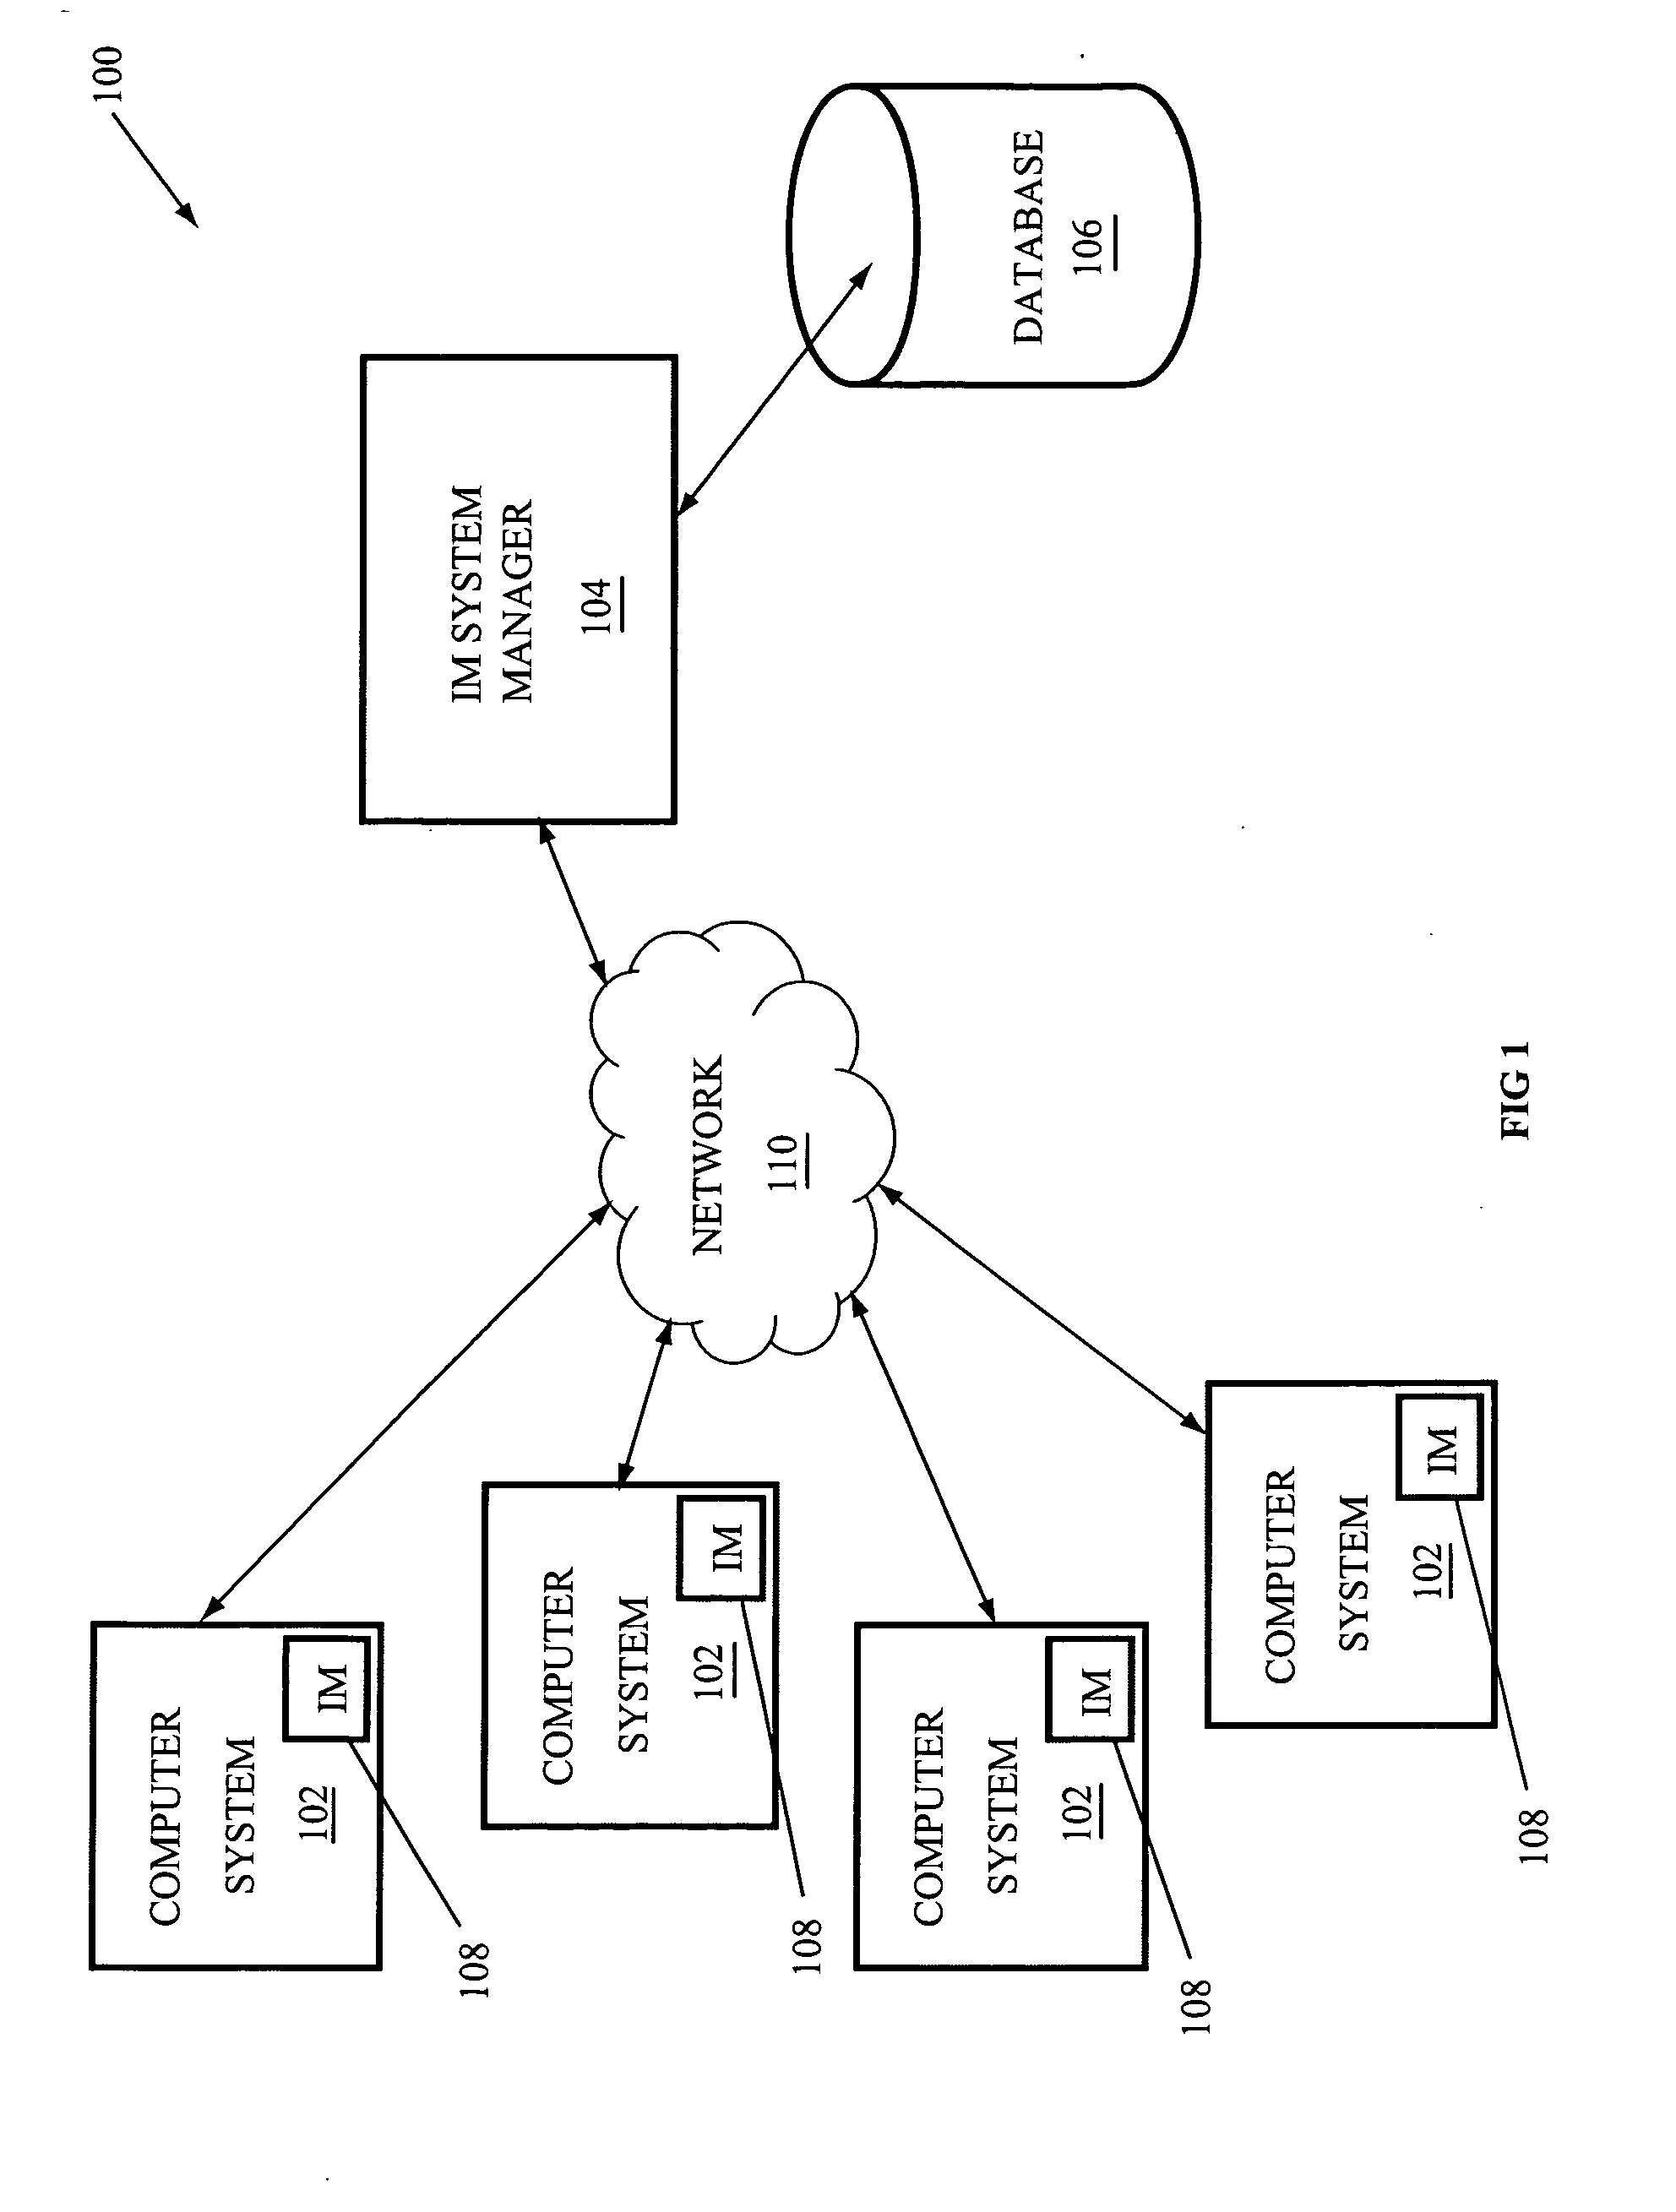 Systems, methods, and media for updating an instant messaging system